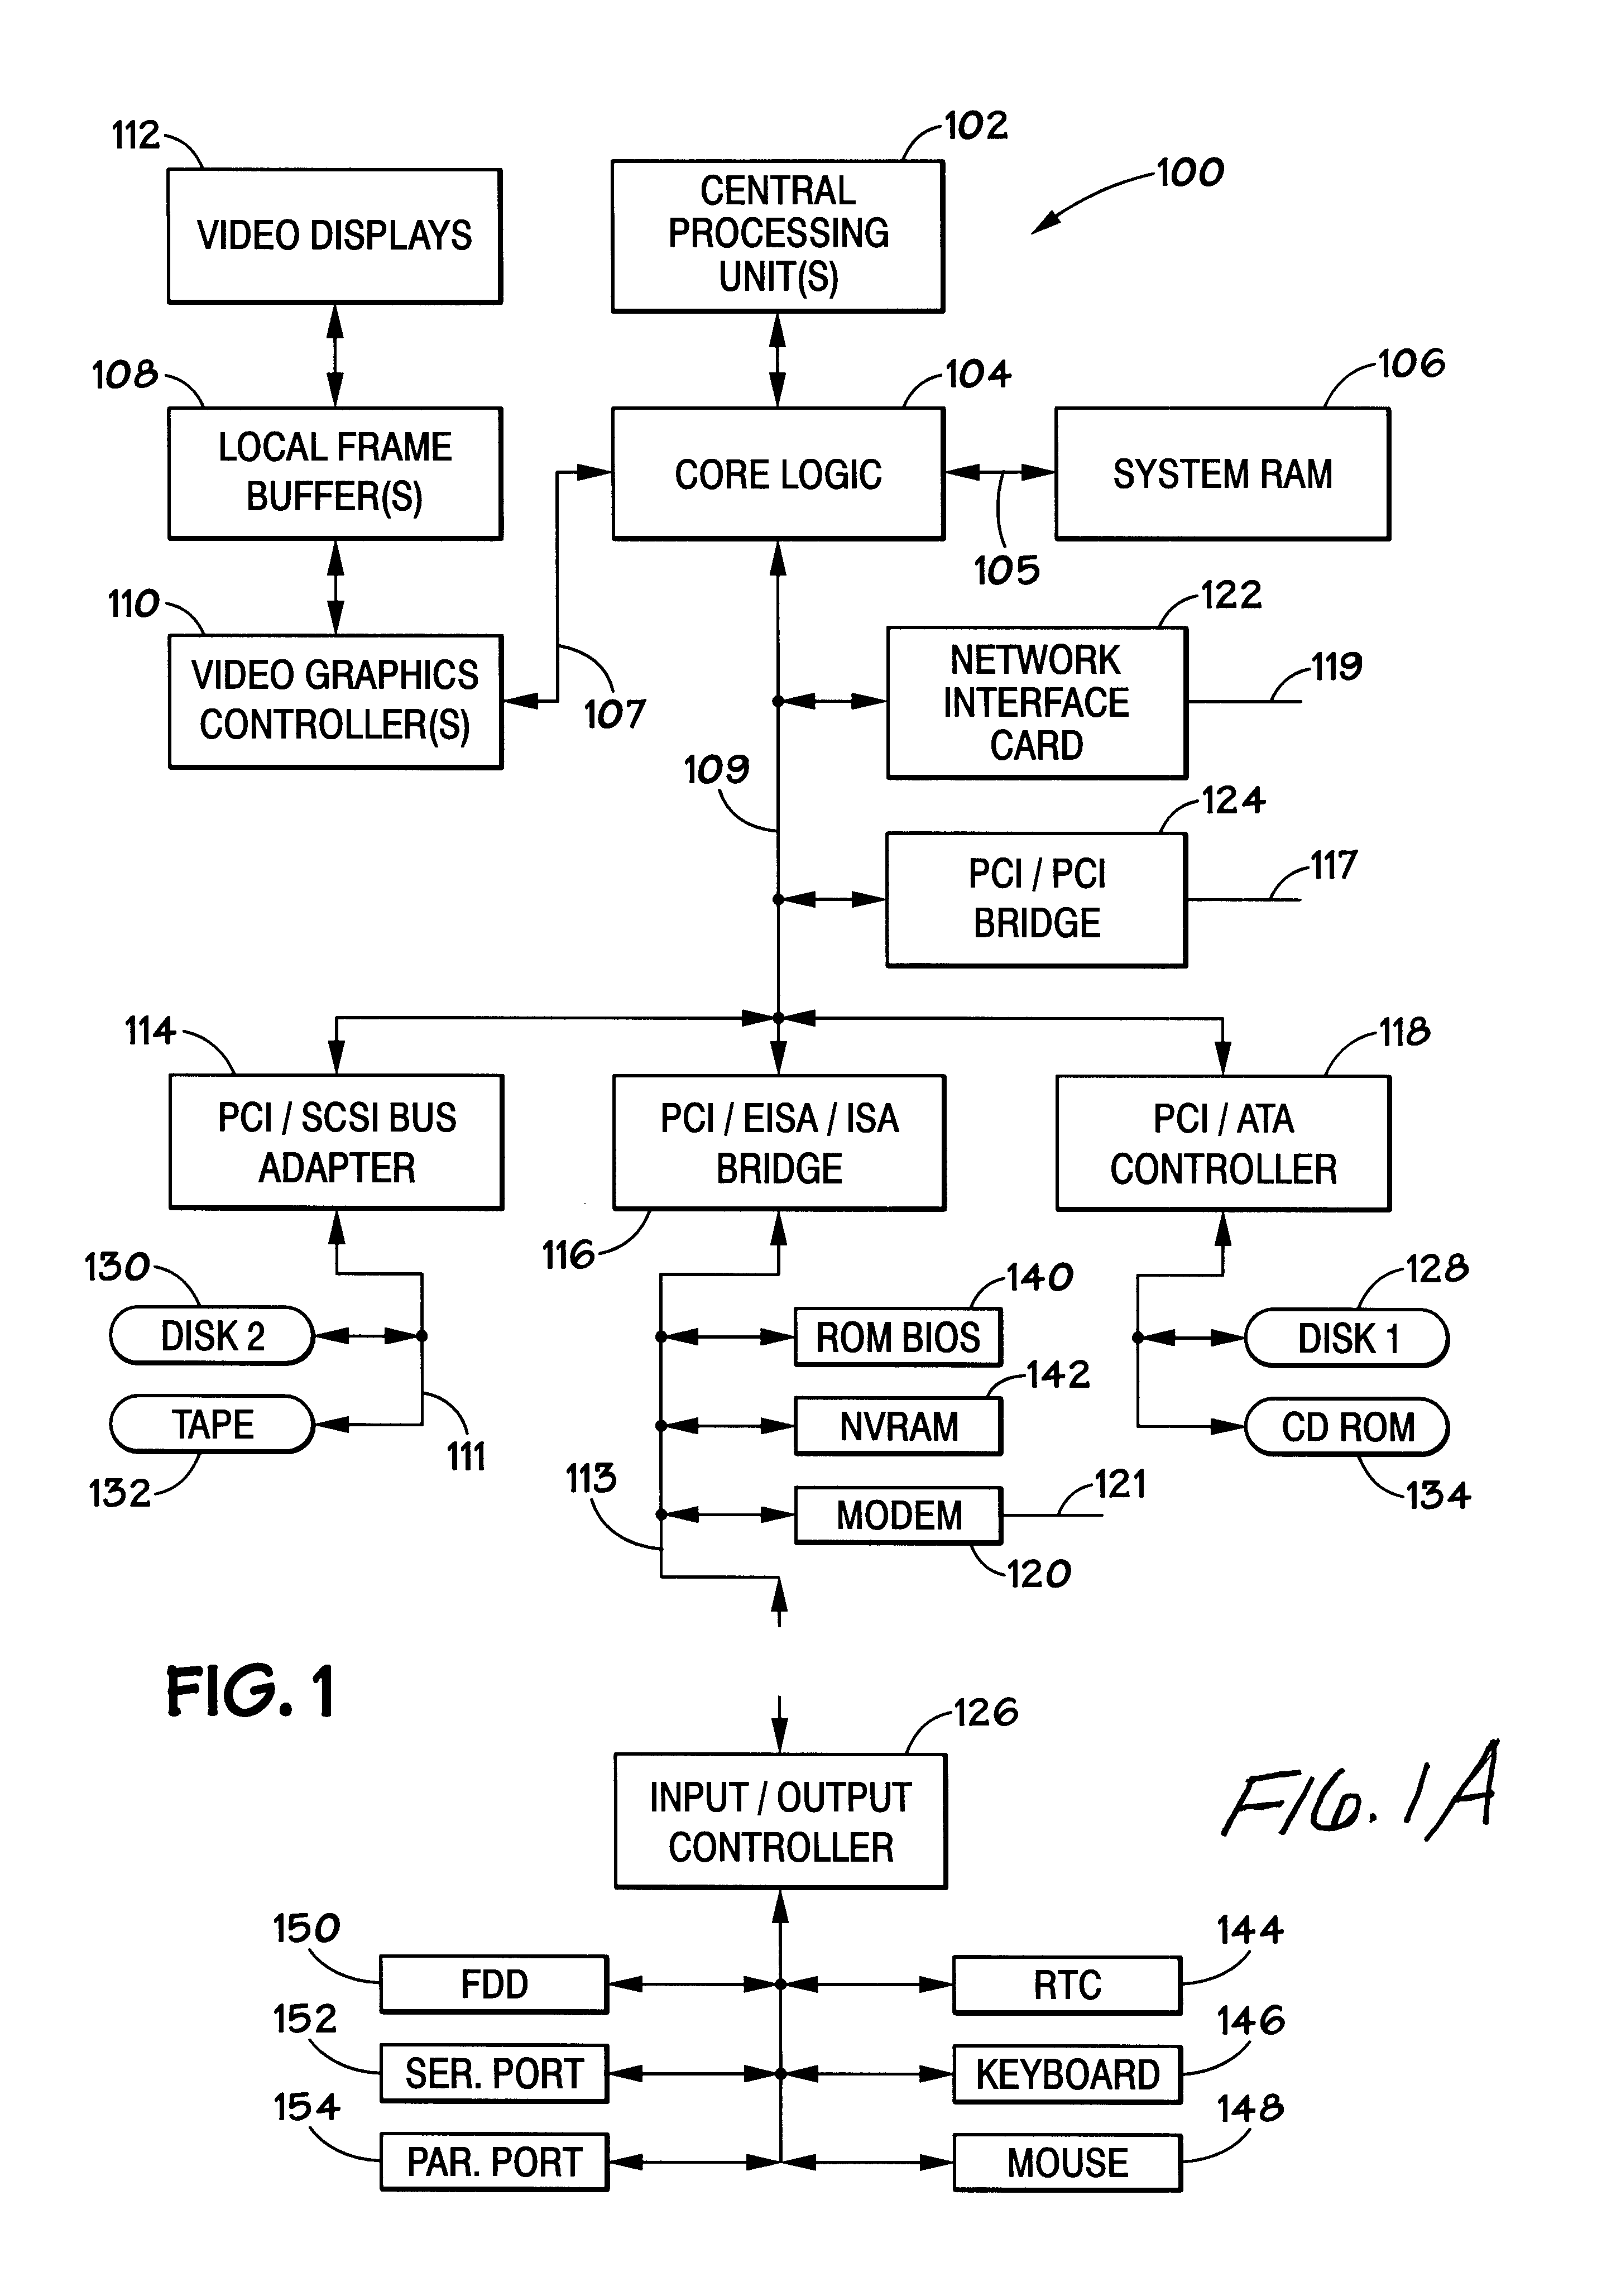 Computer bridge interfaces for accelerated graphics port and peripheral component interconnect devices